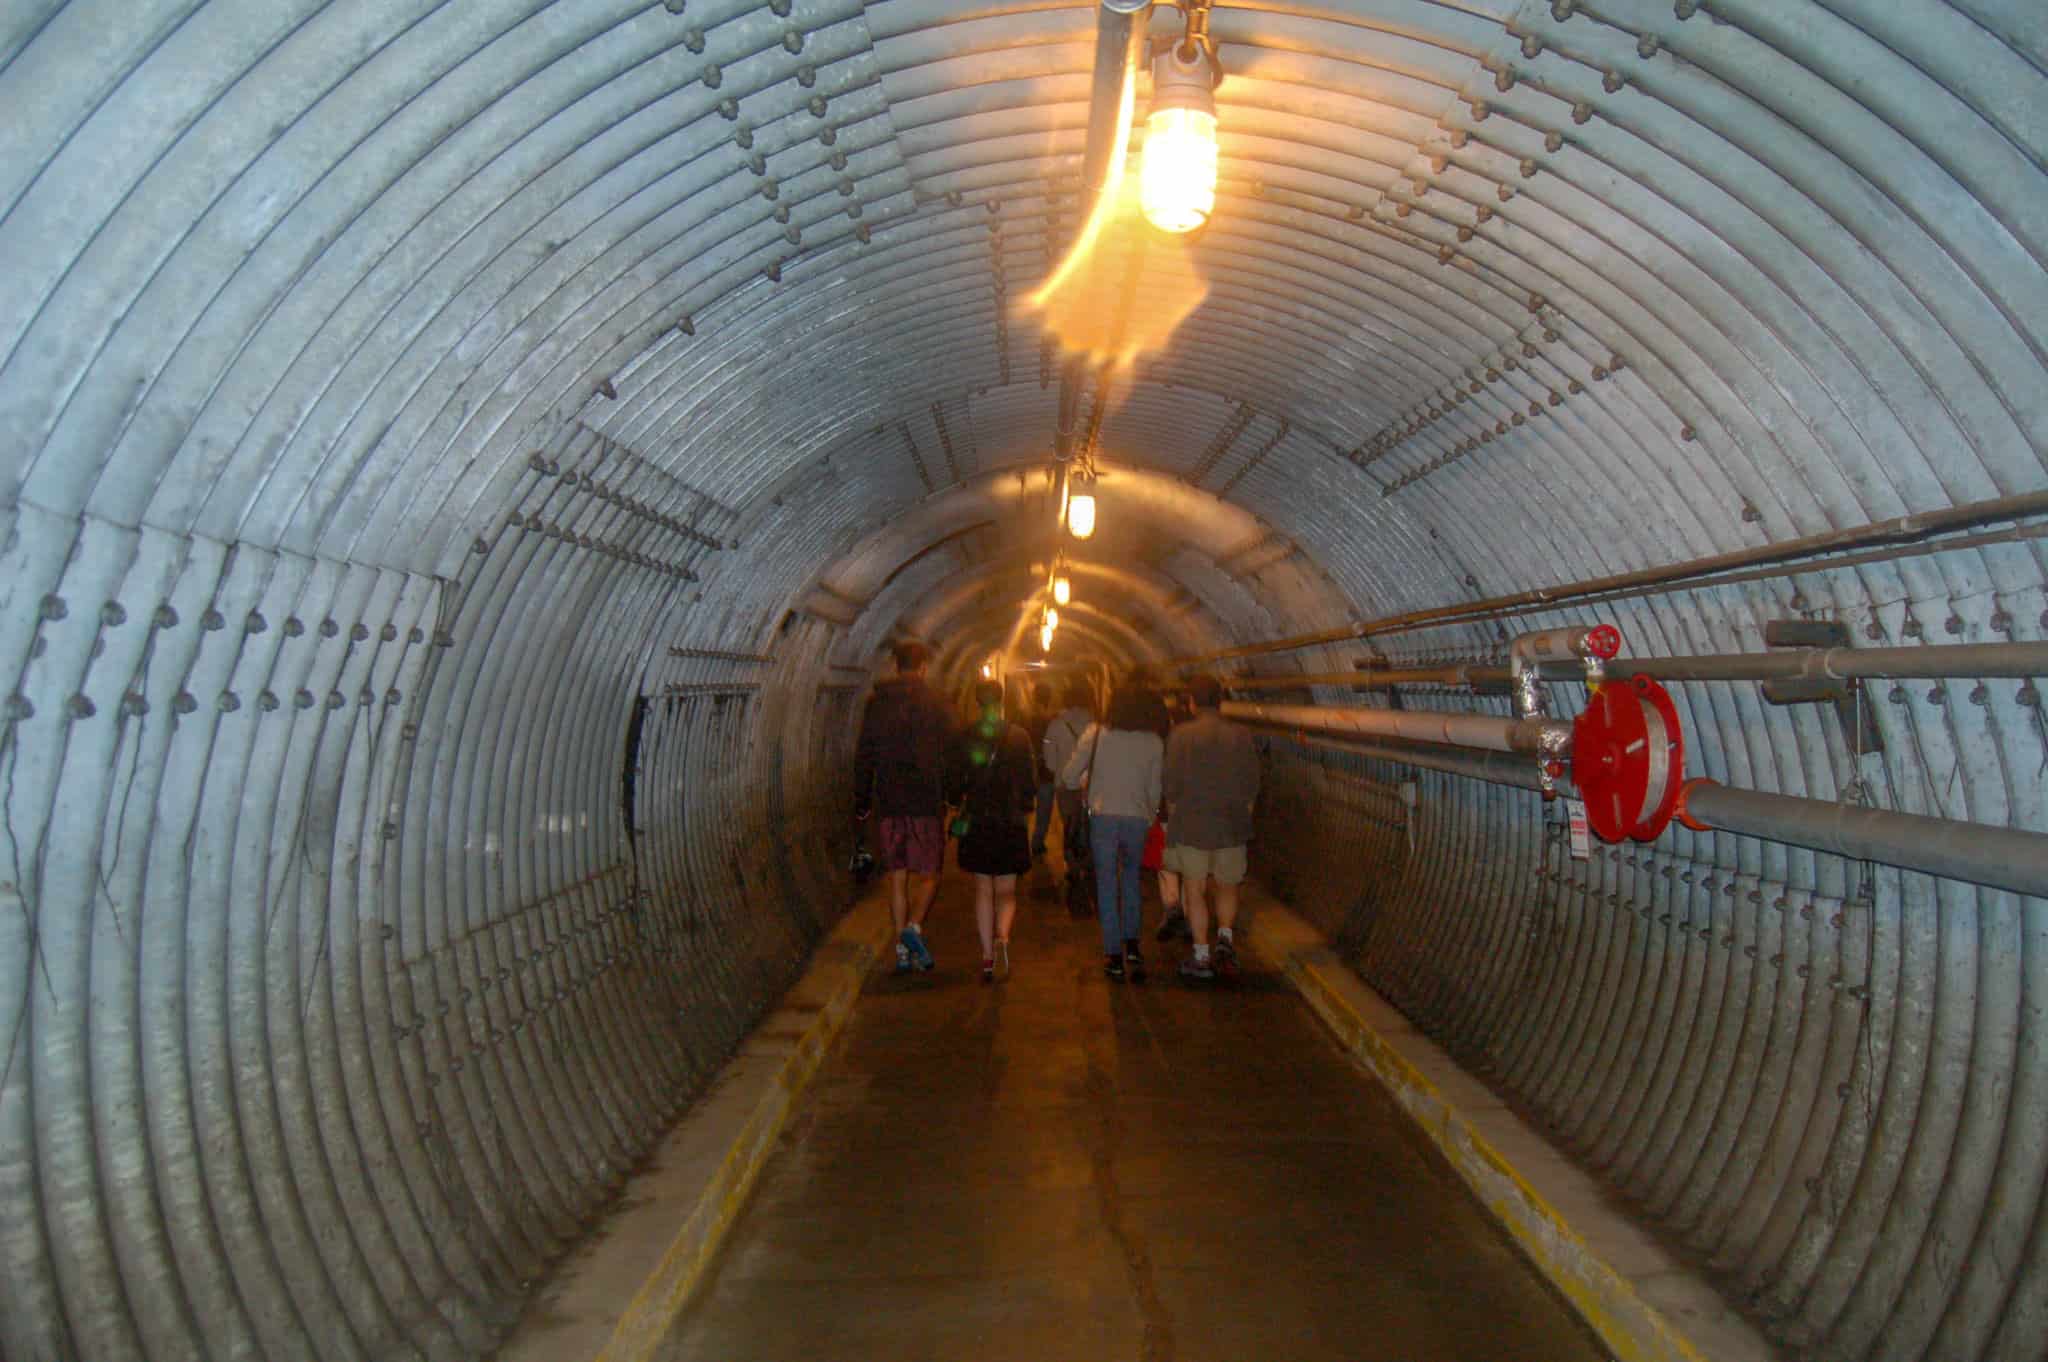 Exploring the Diefenbunker is one of the things to do in Ottawa